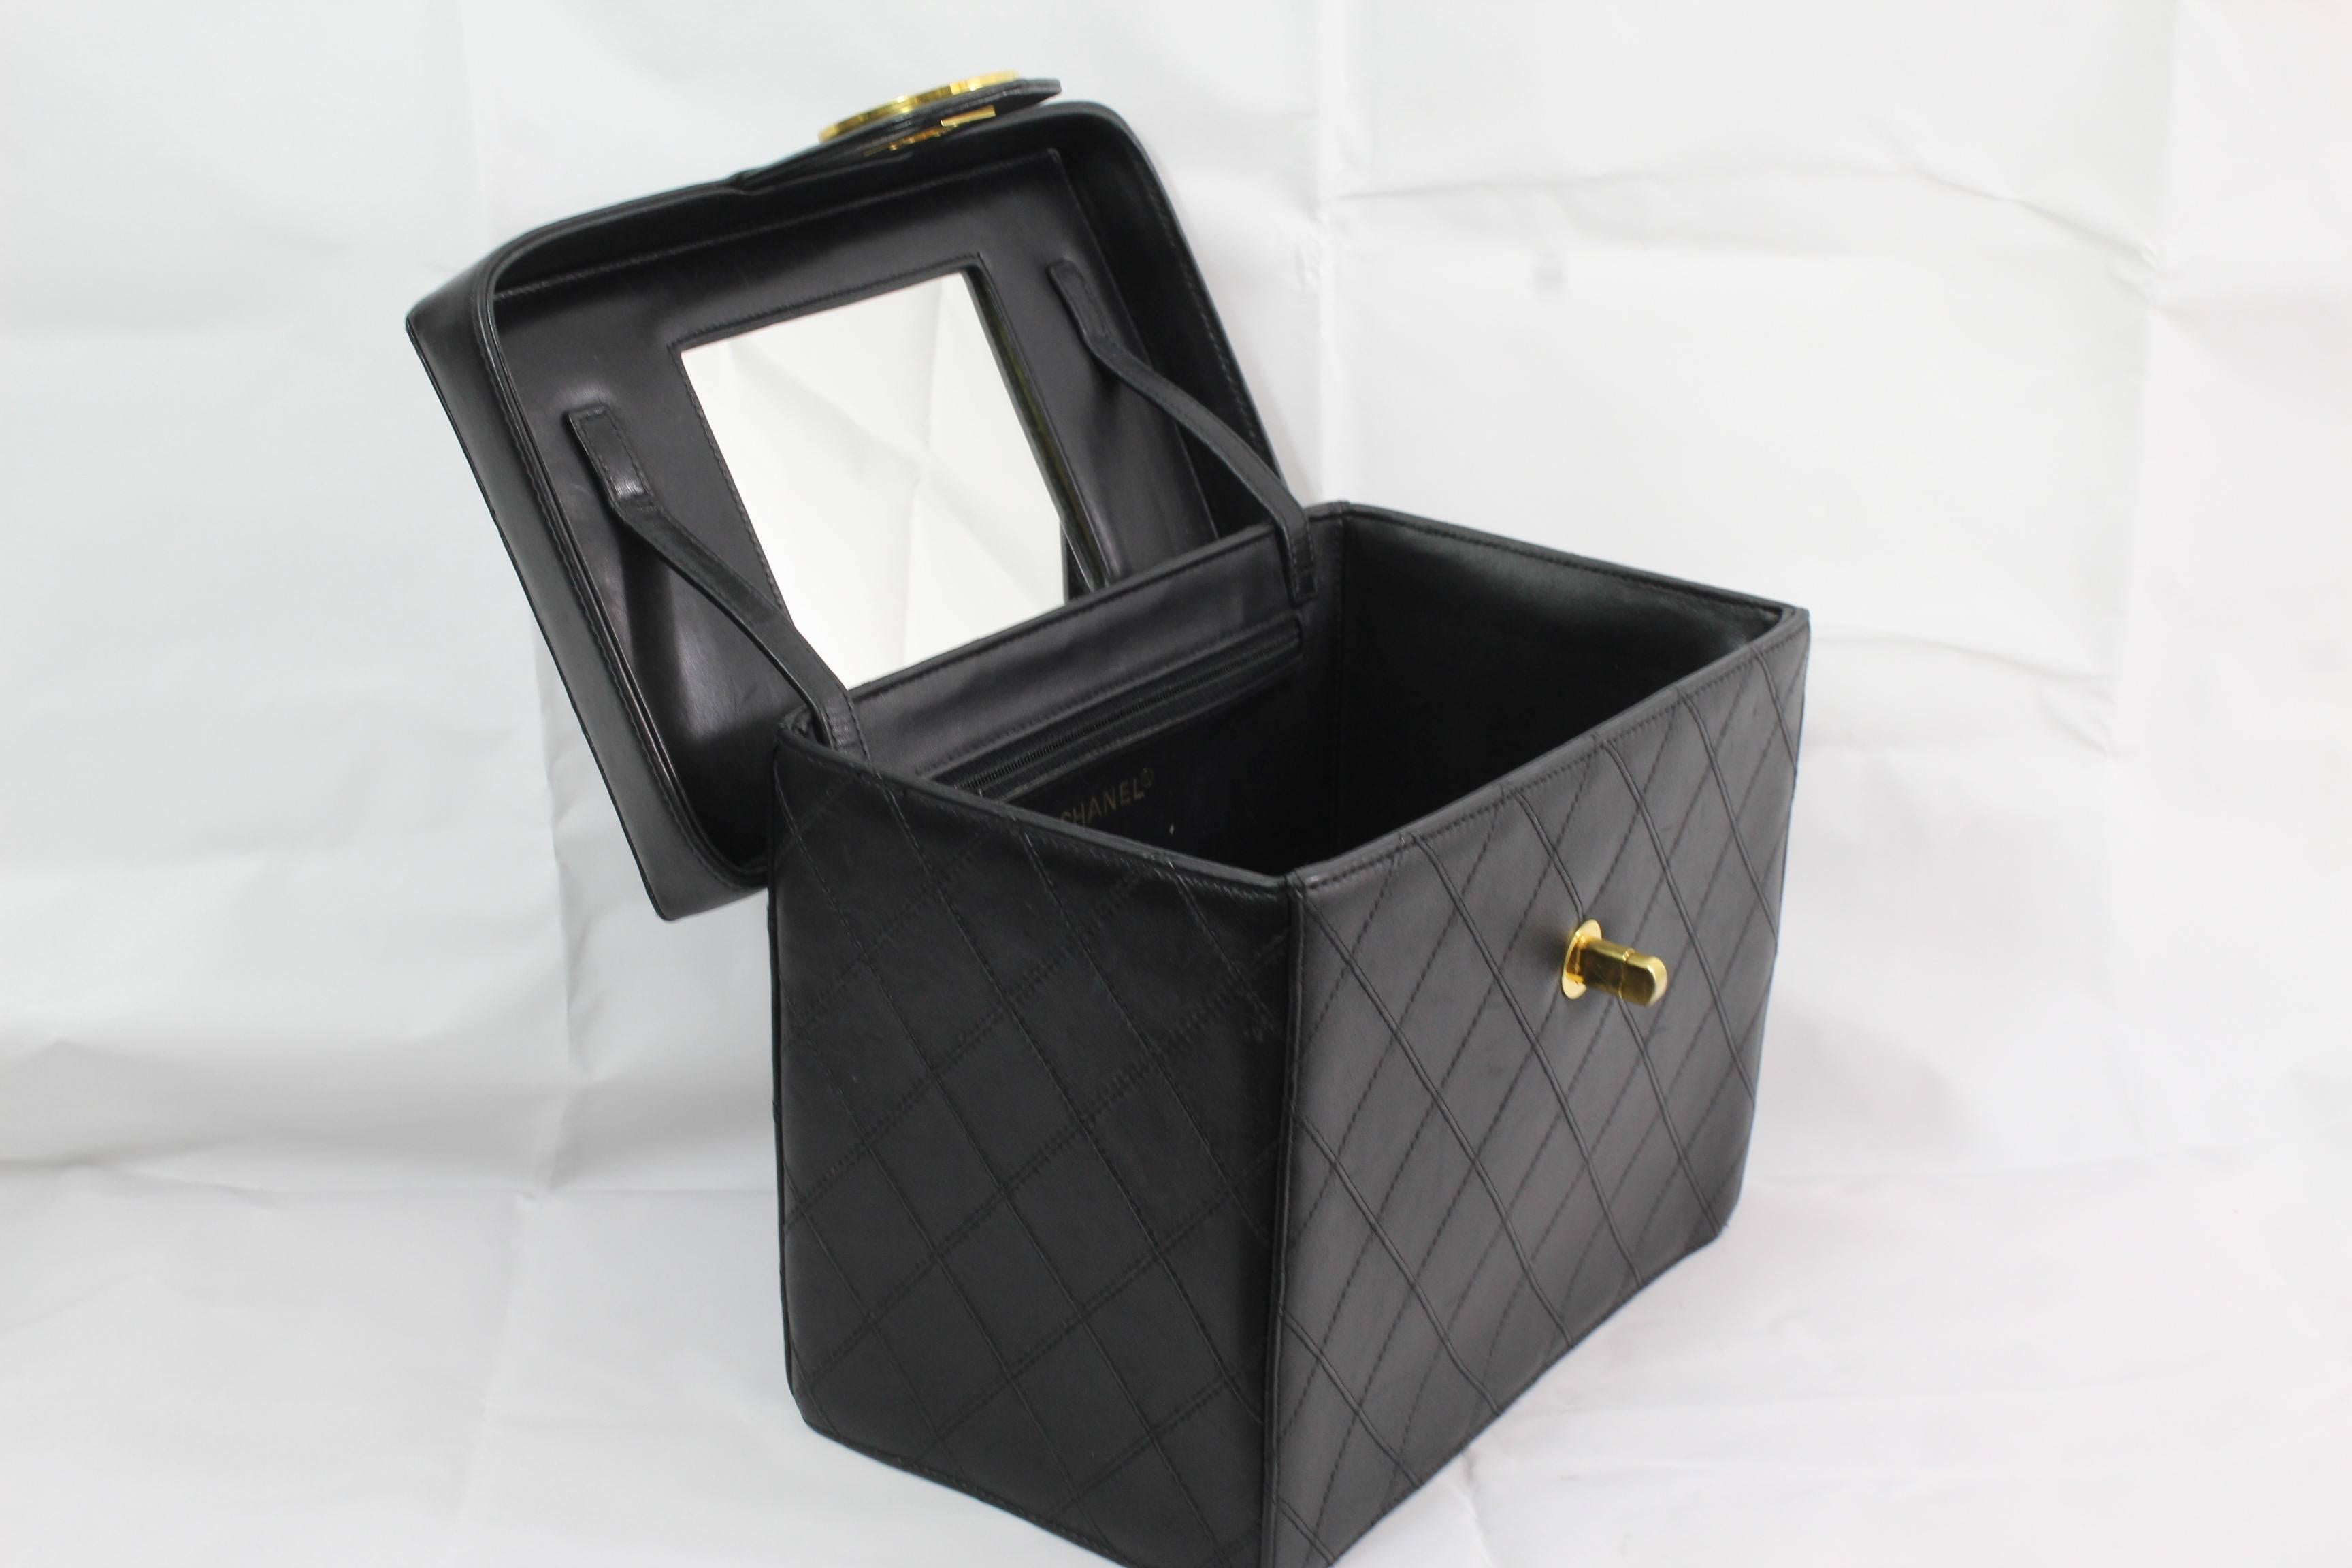 Vintage Chanel Vanity case in black lamb leather and golden hardware. Posisble to attach a strap and wear it as a shoulder bag

Good vintage condition, it has some small signs of use.

Size 9*5.7 inches